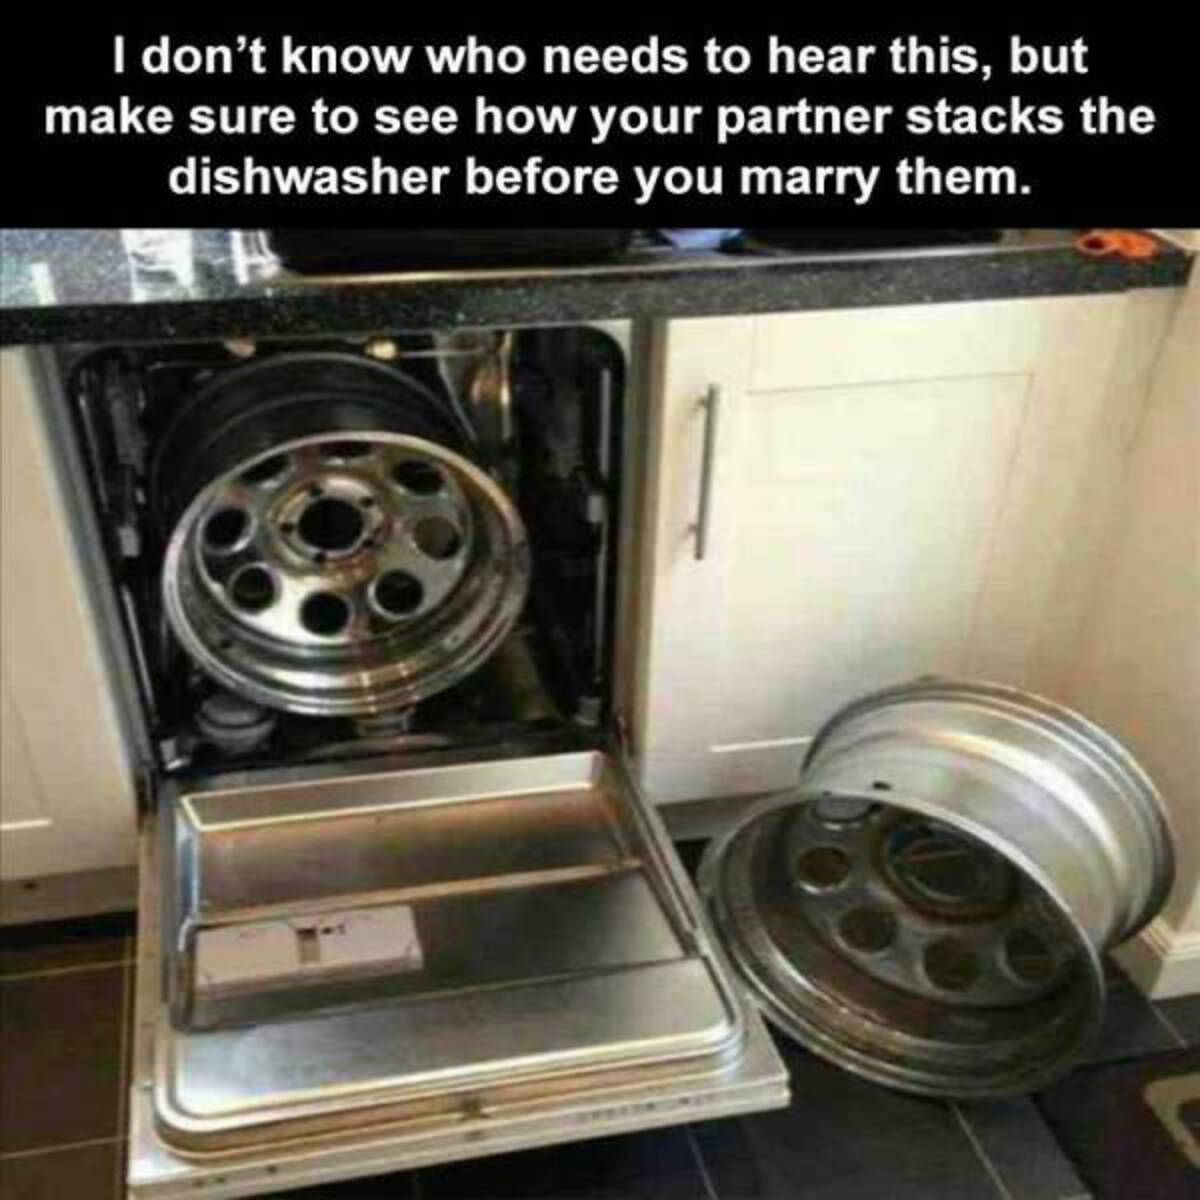 I don't know who needs to hear this, but make sure to see how your partner stacks the dishwasher before you marry them.